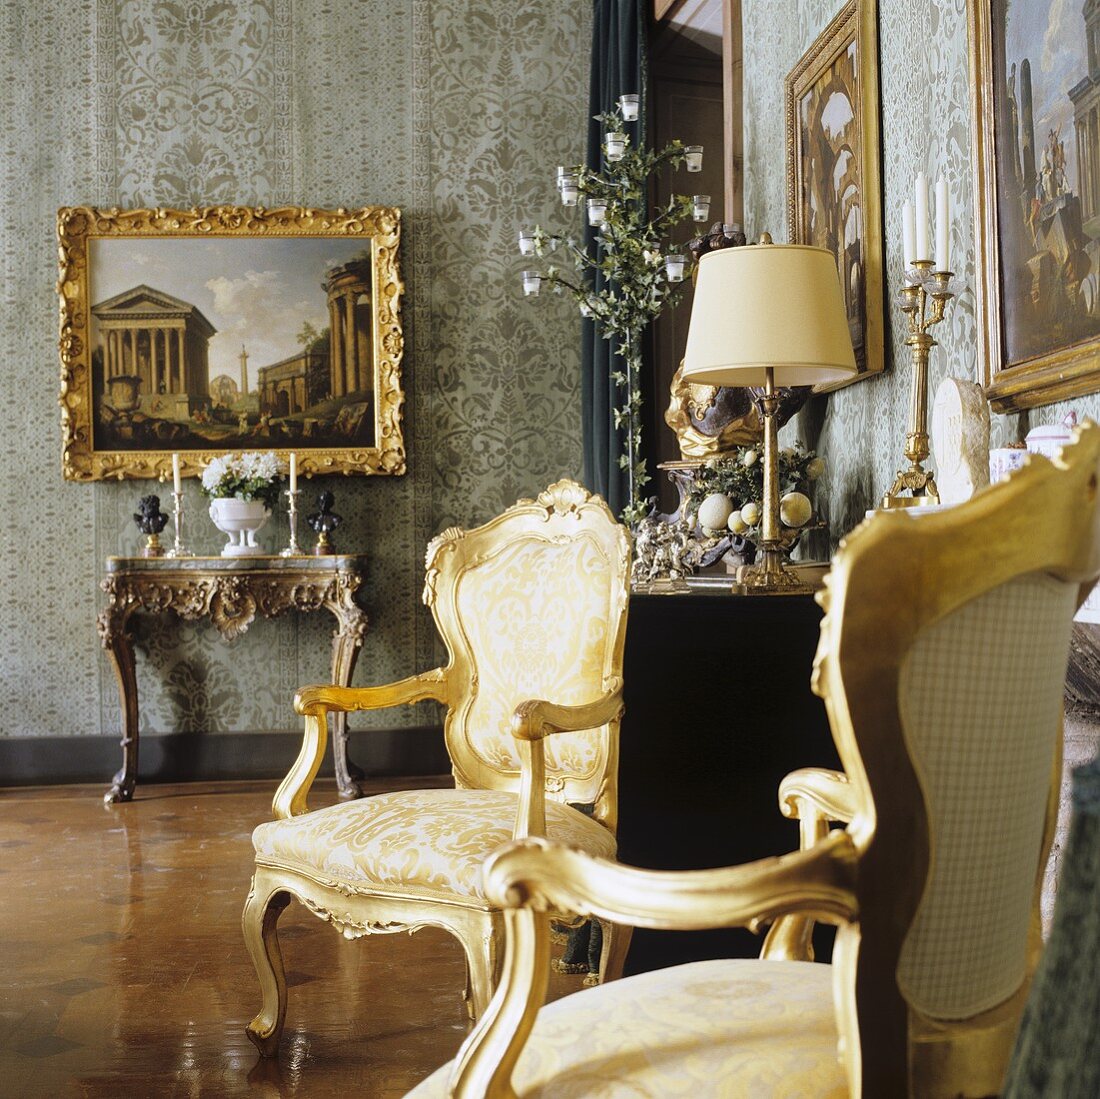 Rococo chairs with gilded frames and a picture hanging above a wall table in a palazzo